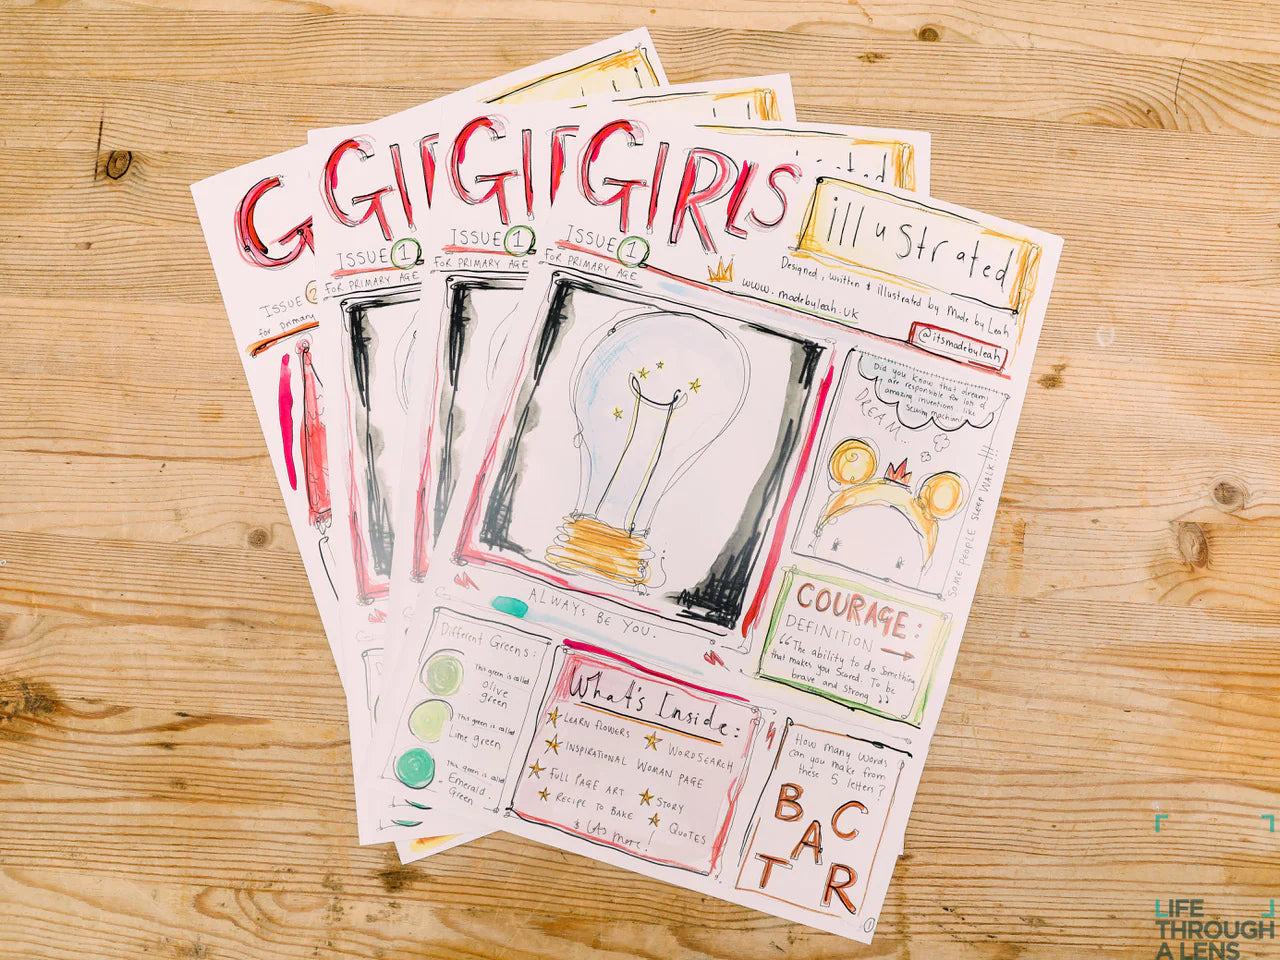 Girls illustrated vol 1 magazine by Made by Leah